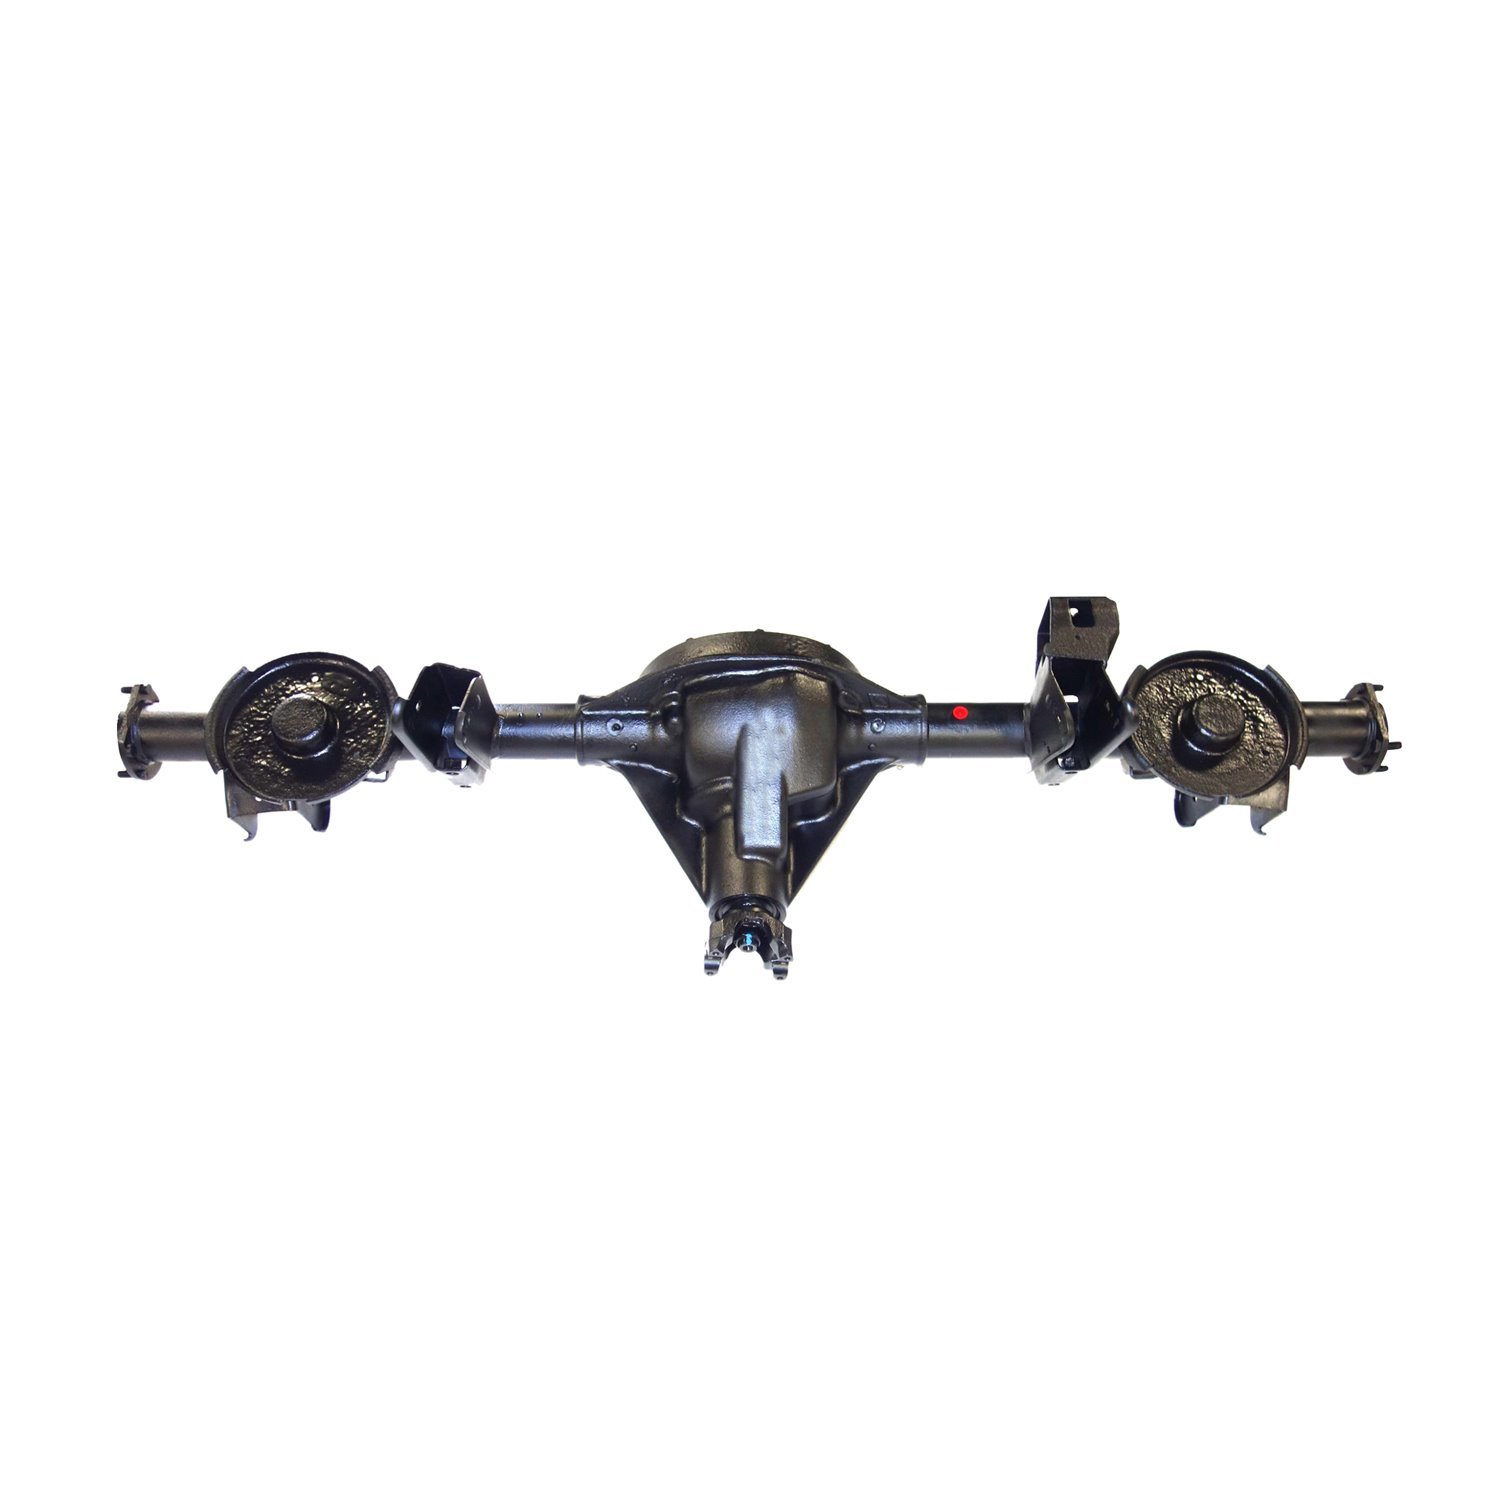 Remanufactured Complete Axle Assembly for Dana 35 2002 Liberty 4.11 , 3.7l w/o ABS